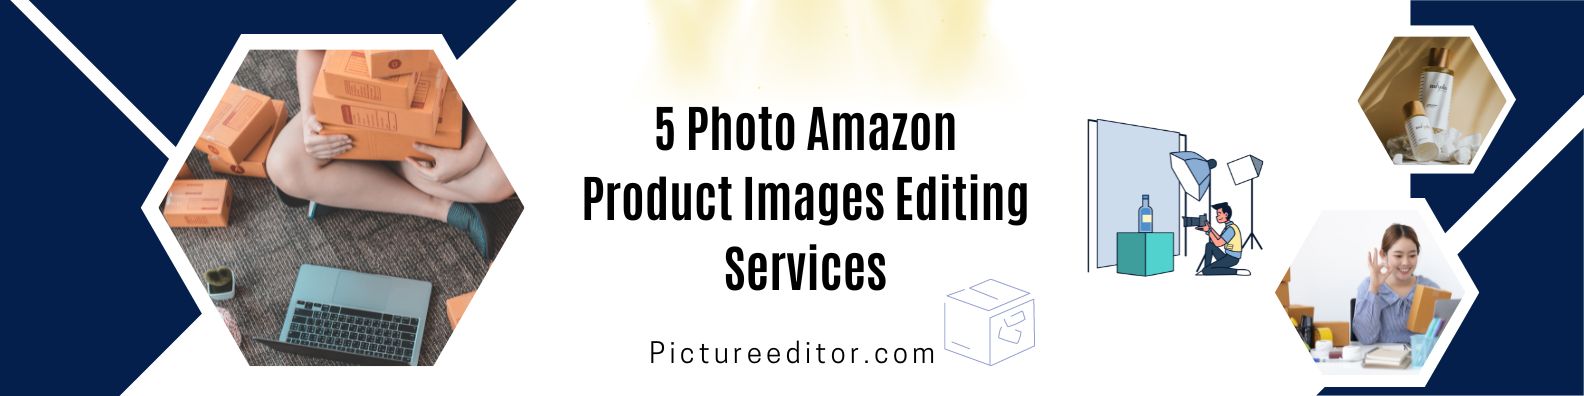 5 Photo Amazon Product Images Editing Services